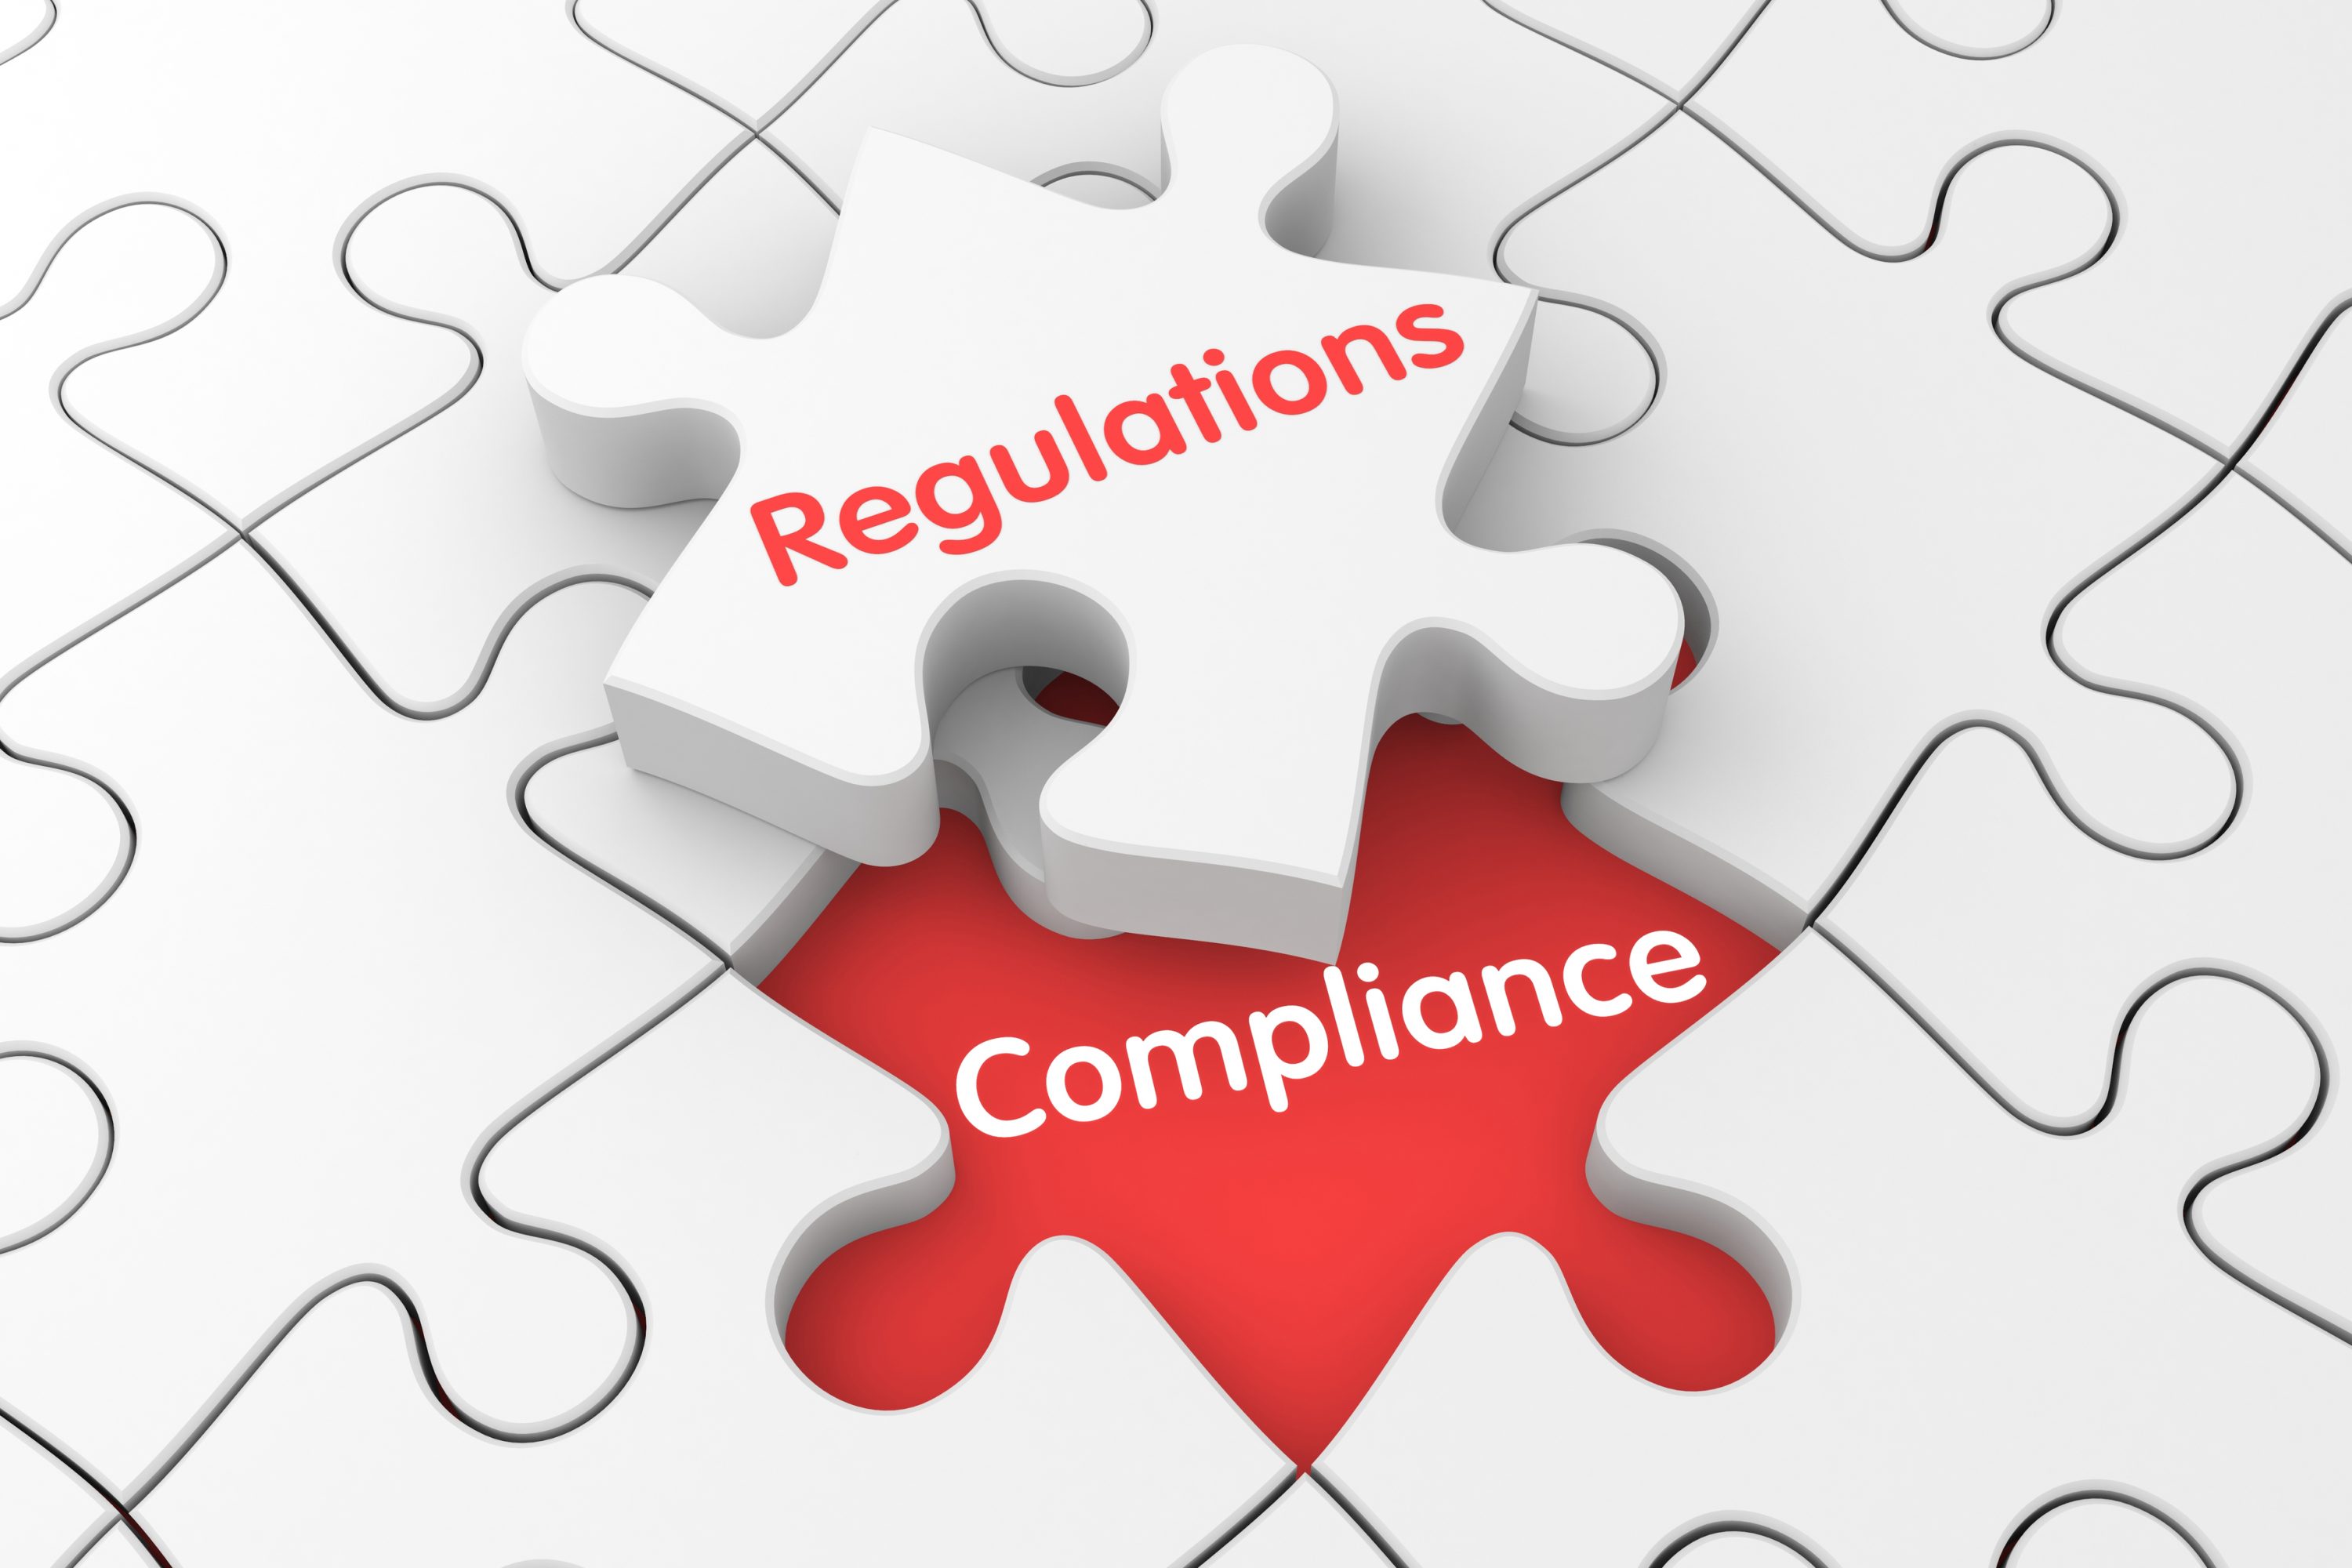 Compliance Related Content Under Techno-Commercial Content